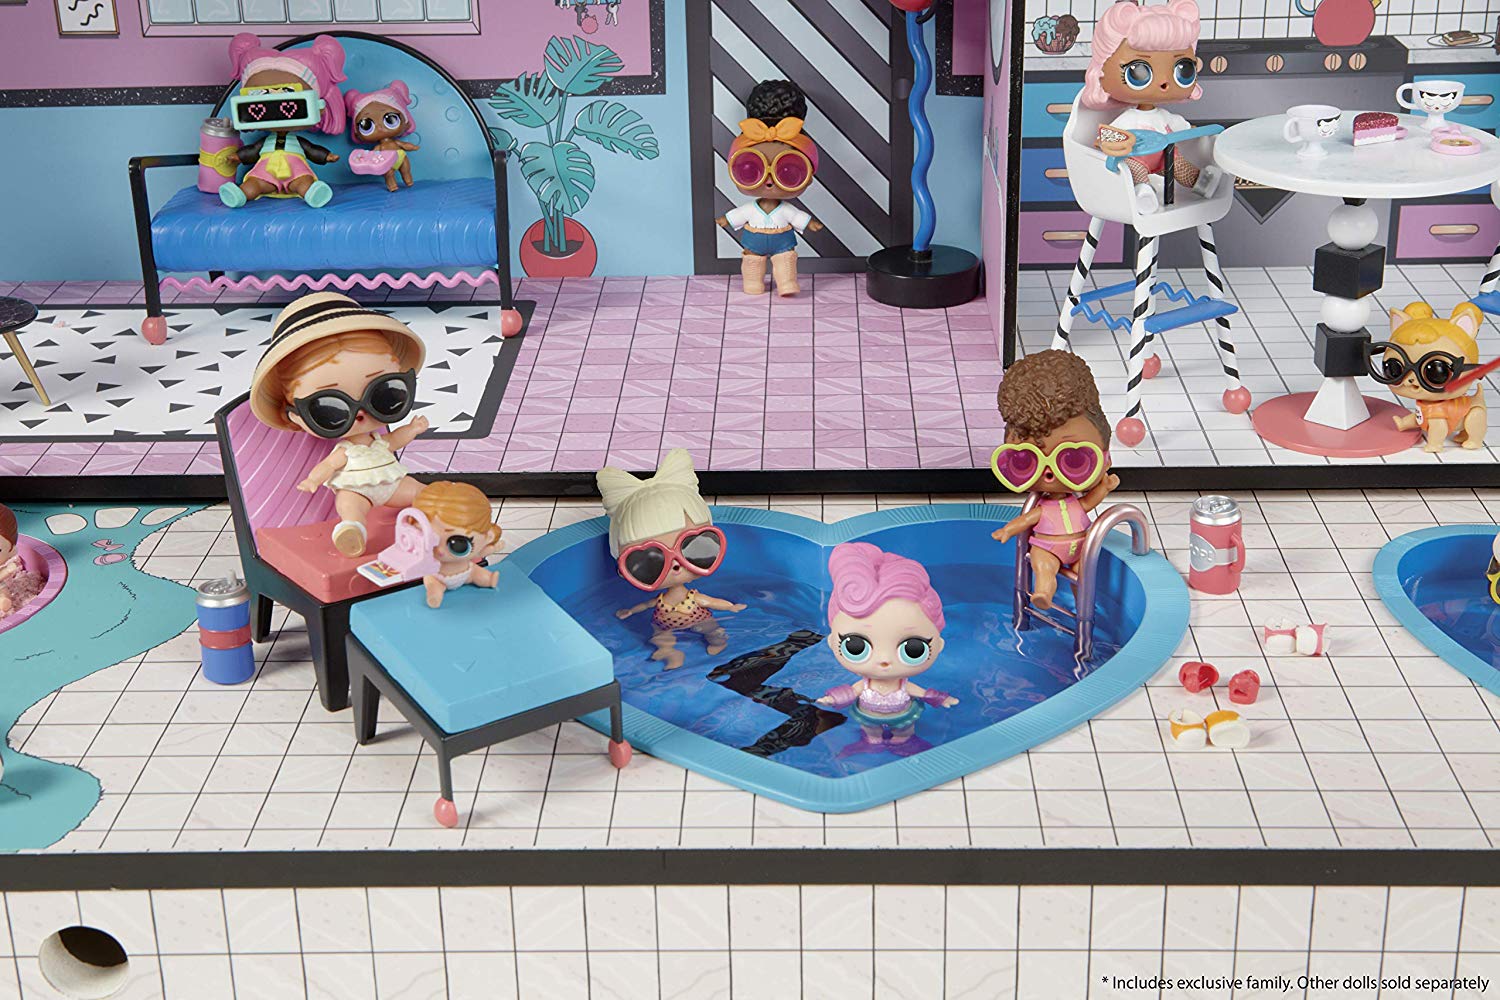 how much is the lol surprise doll house